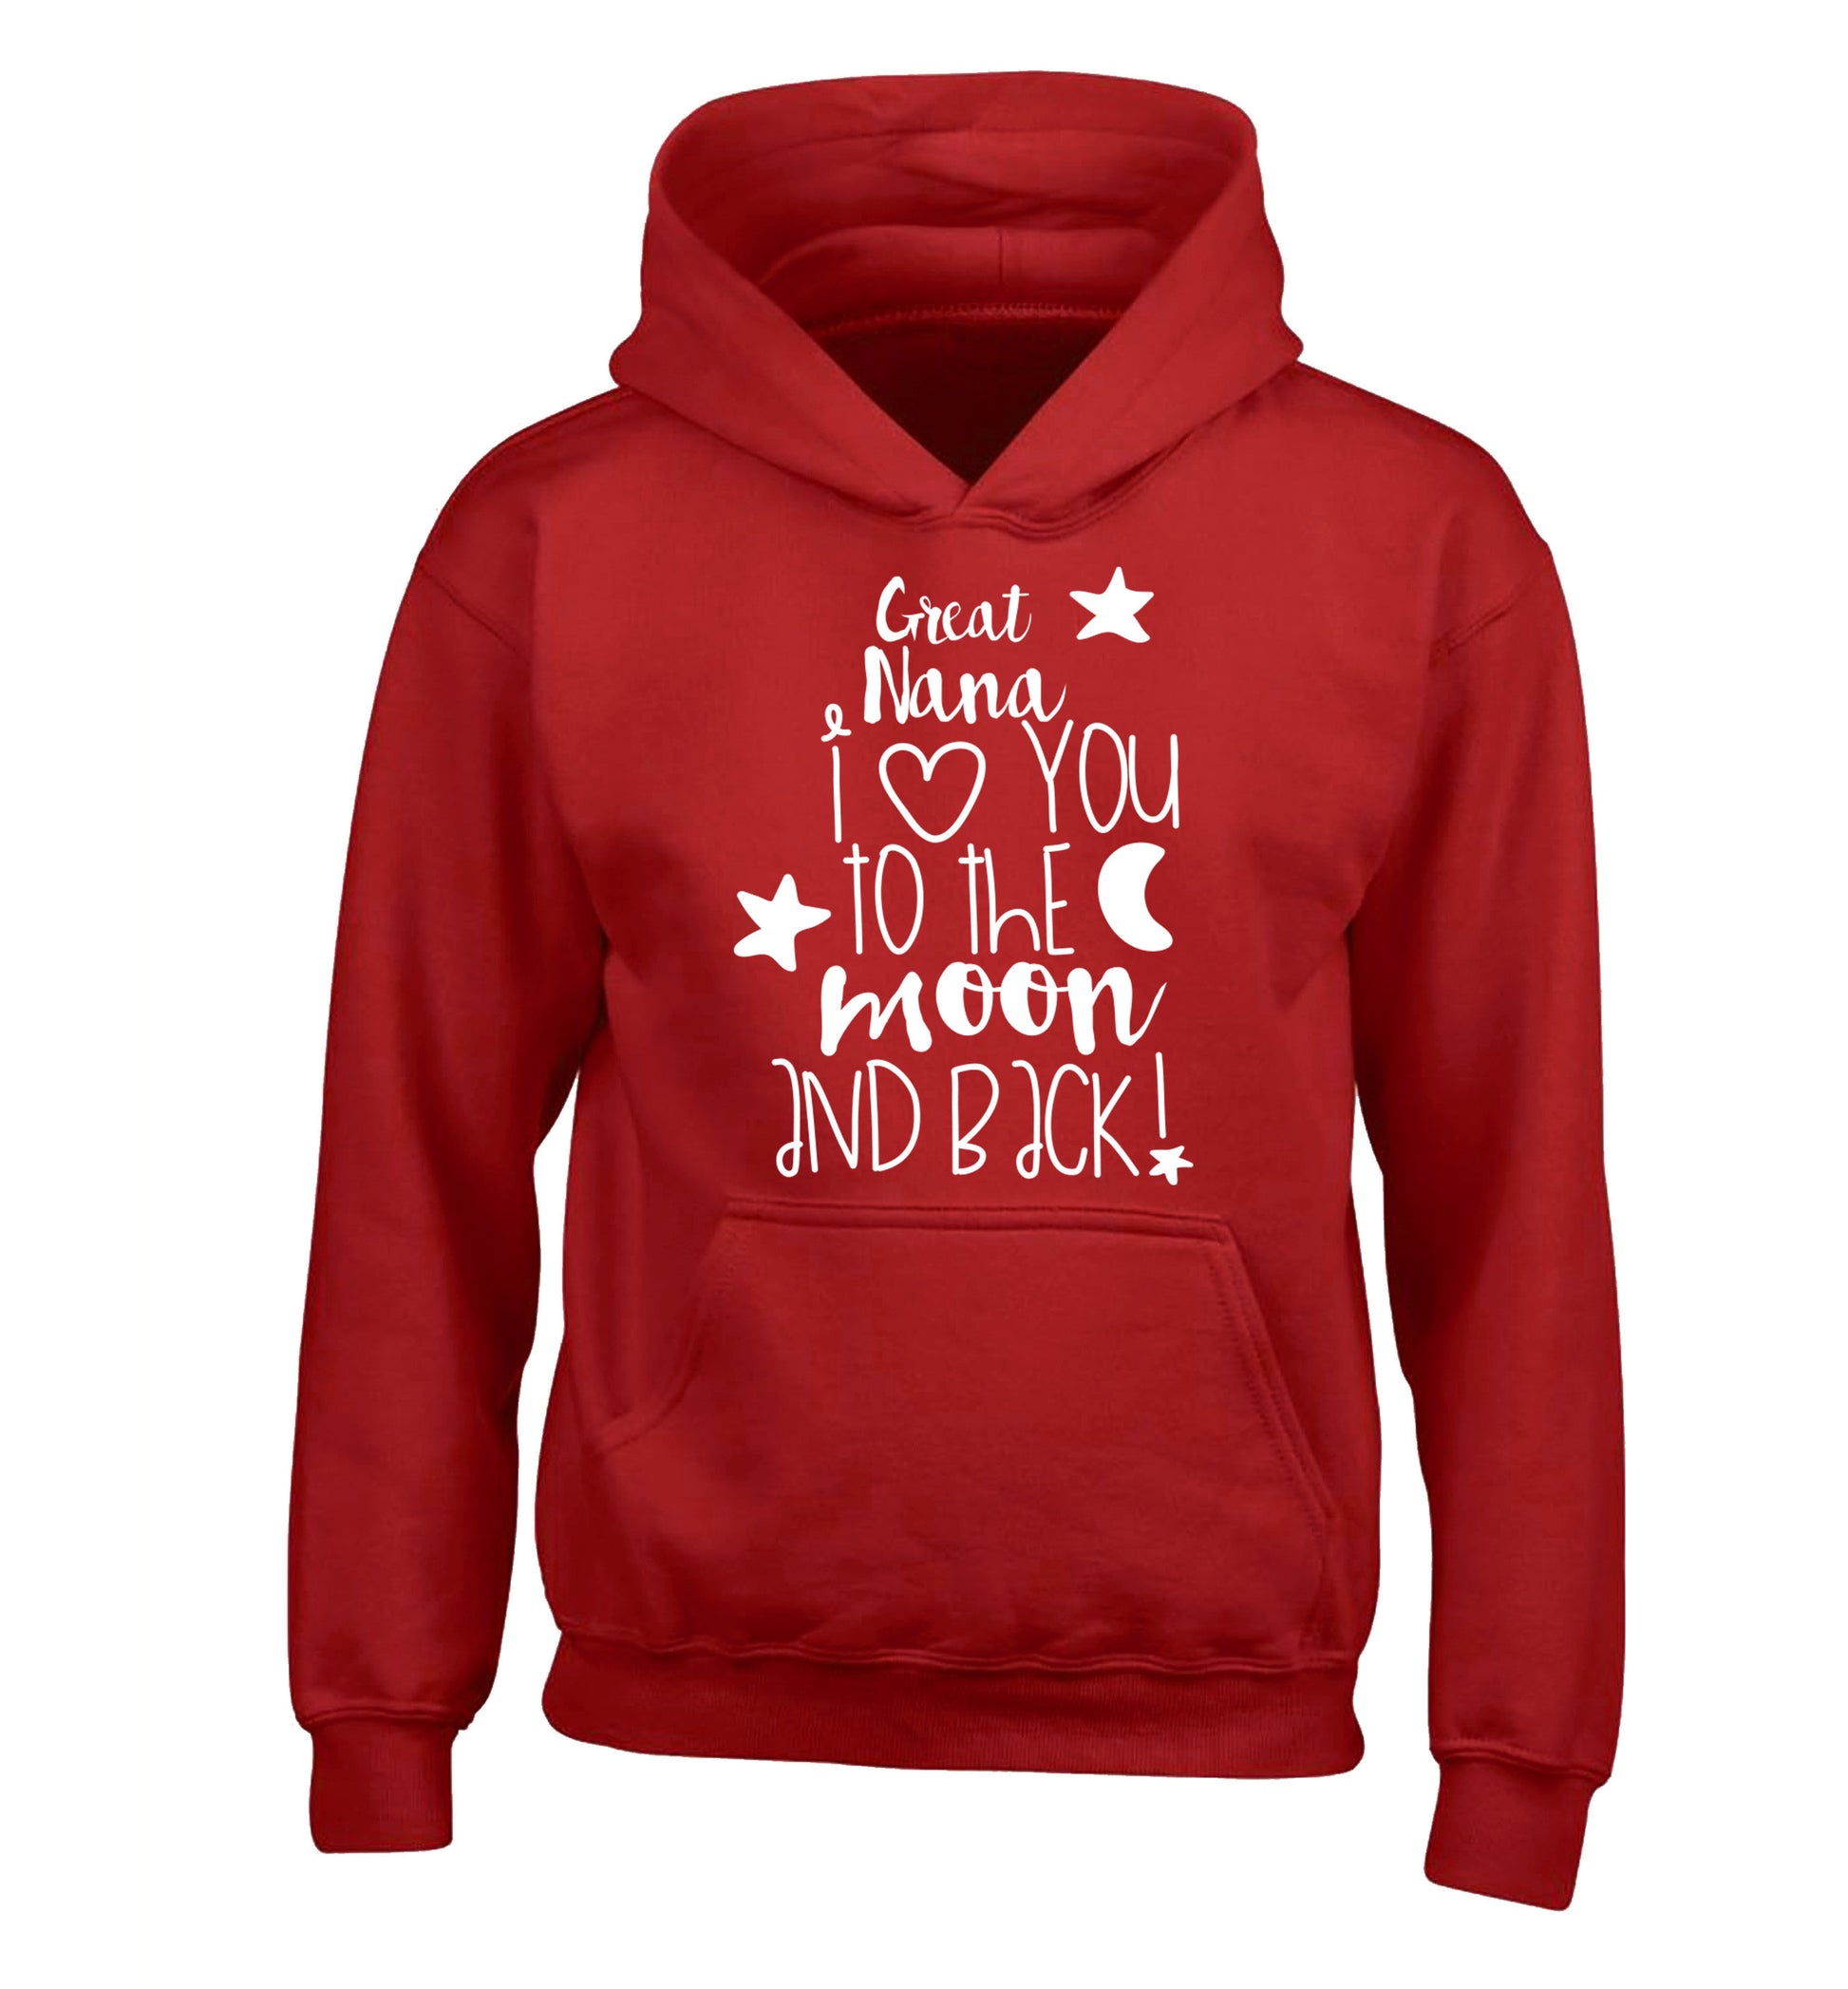 Great Nana I love you to the moon and back children's red hoodie 12-14 Years